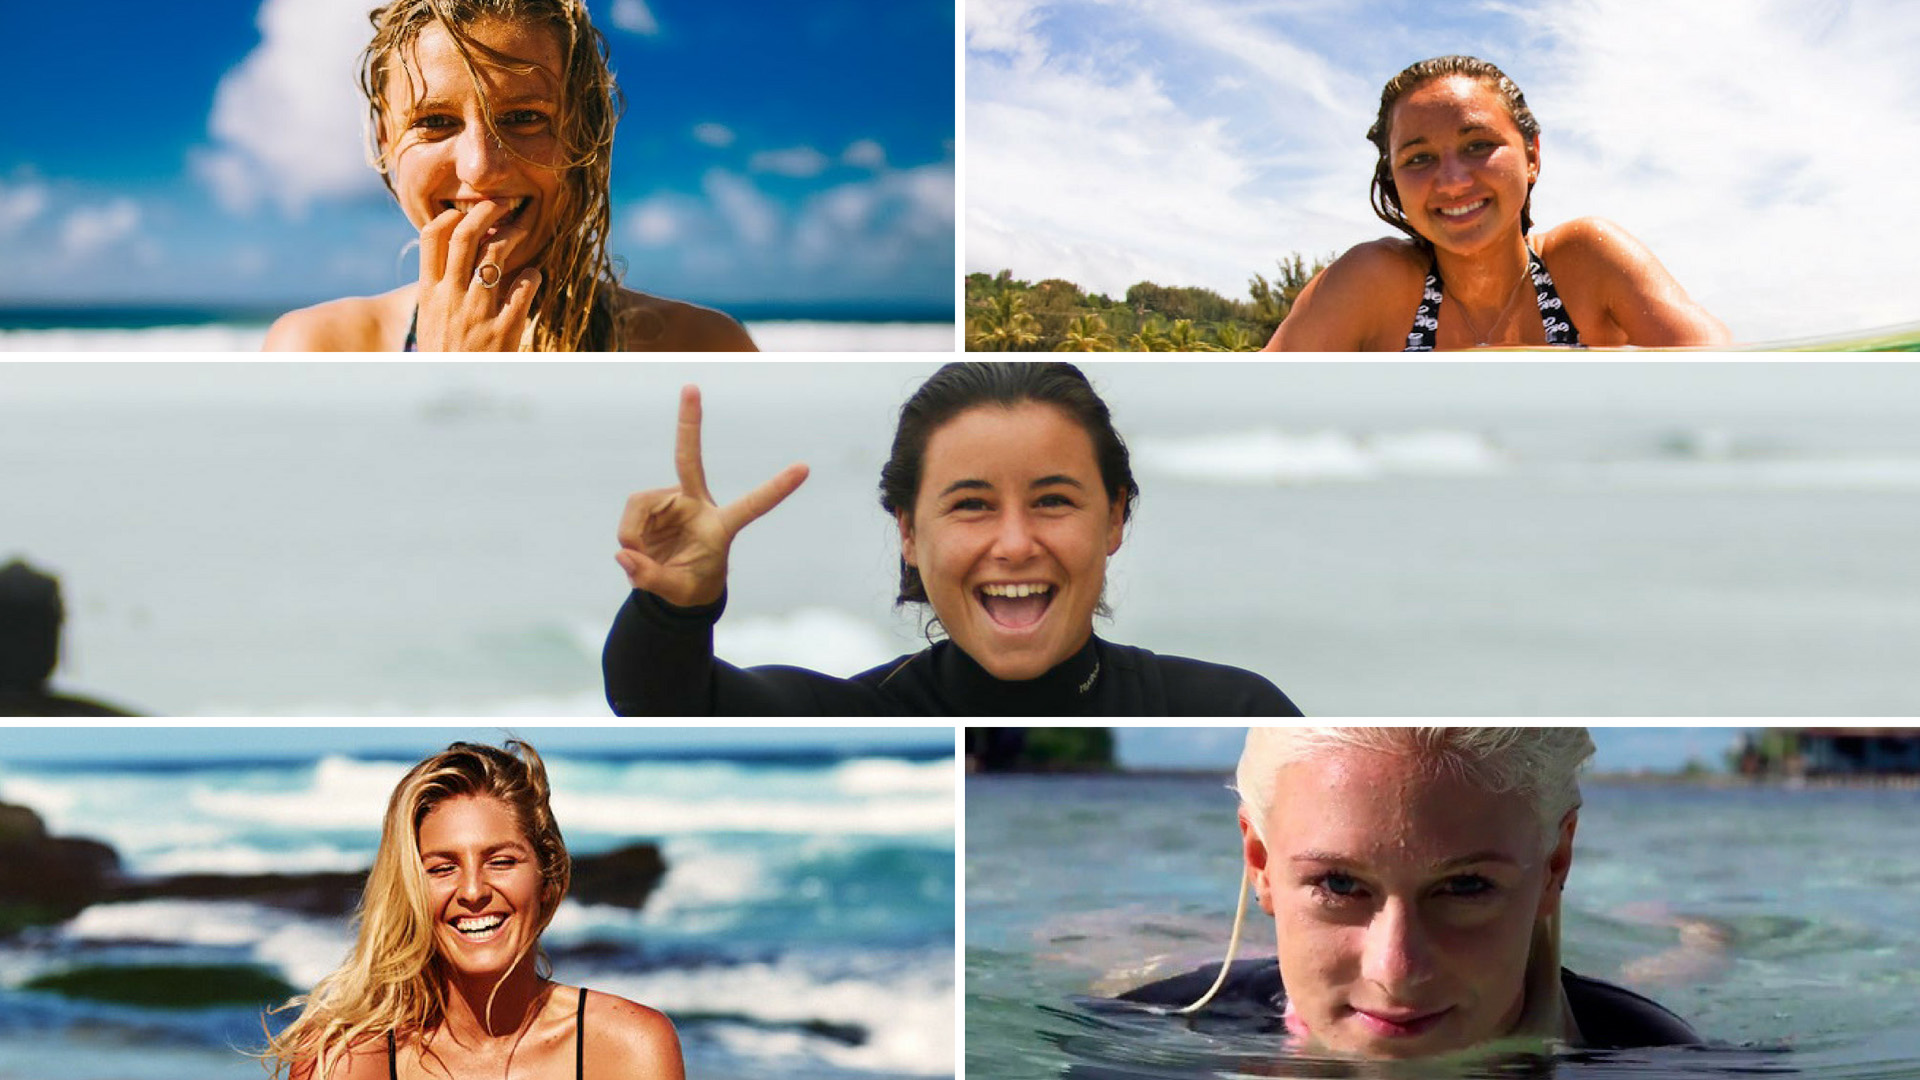 Best female surfers in the world: 10 you should know